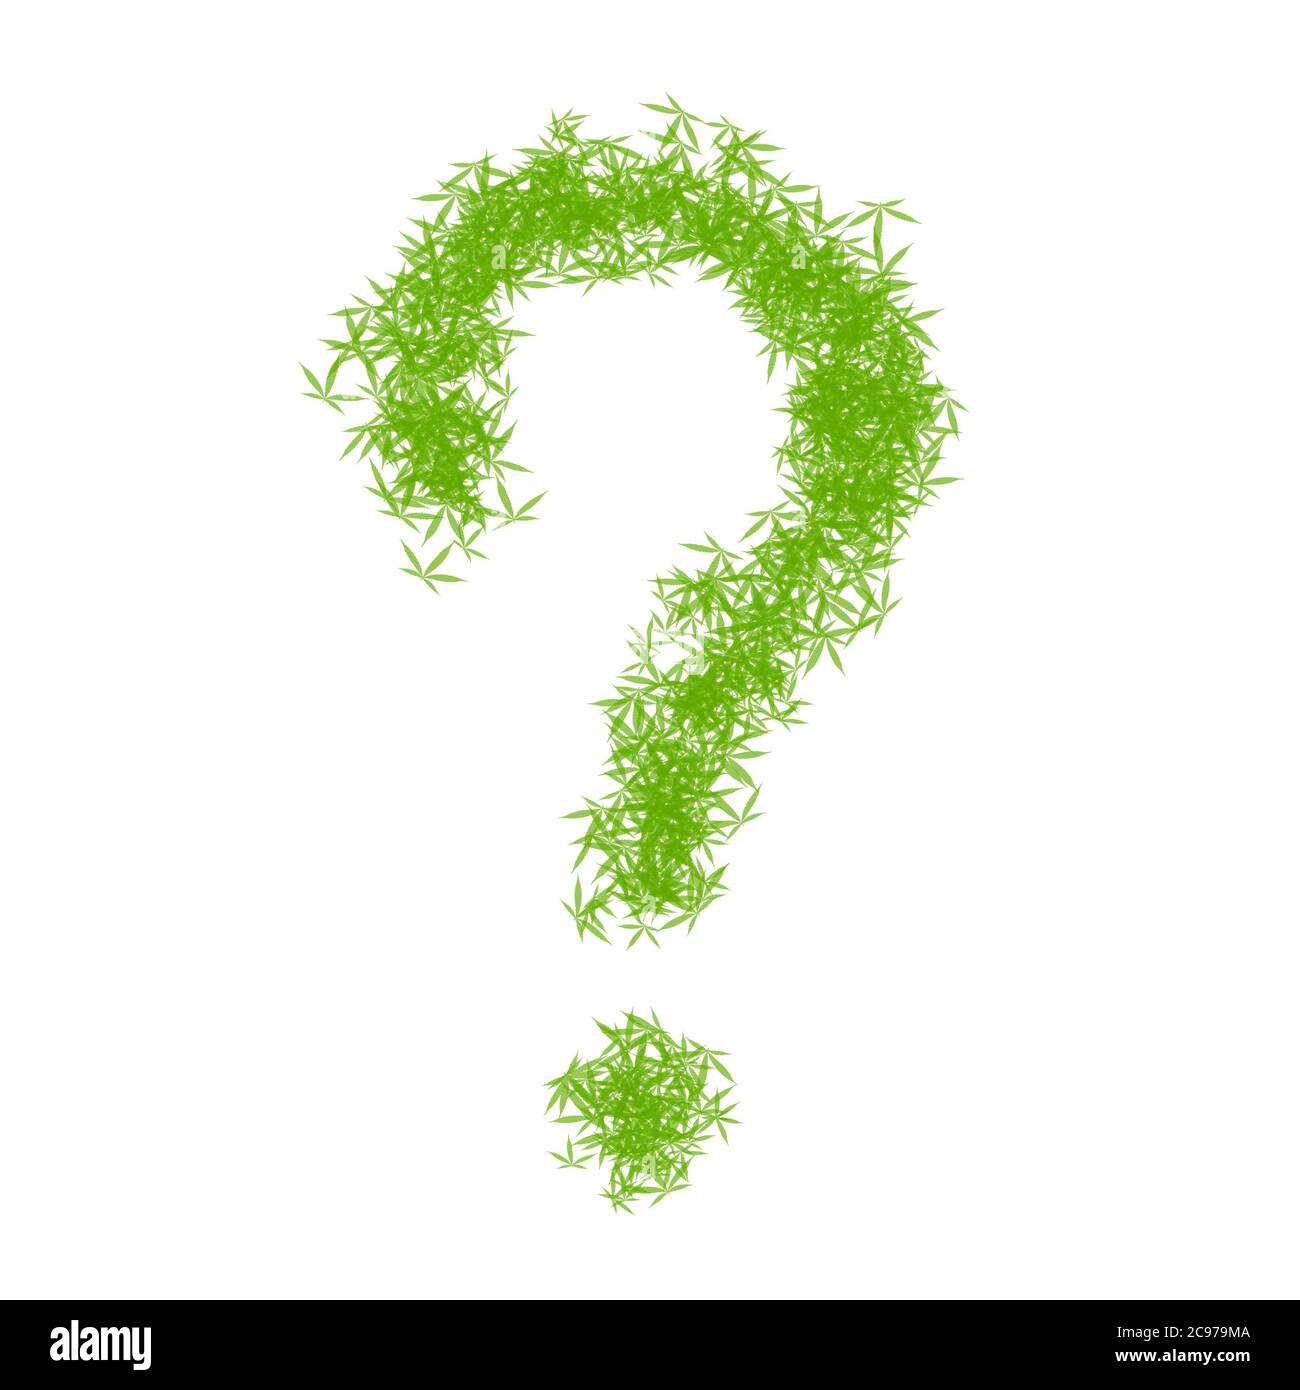 Question mark made from green cannabis leaves on a white background. Drug marijuana herb leaves shapes forming a question sign. Legalization of Stock Photo